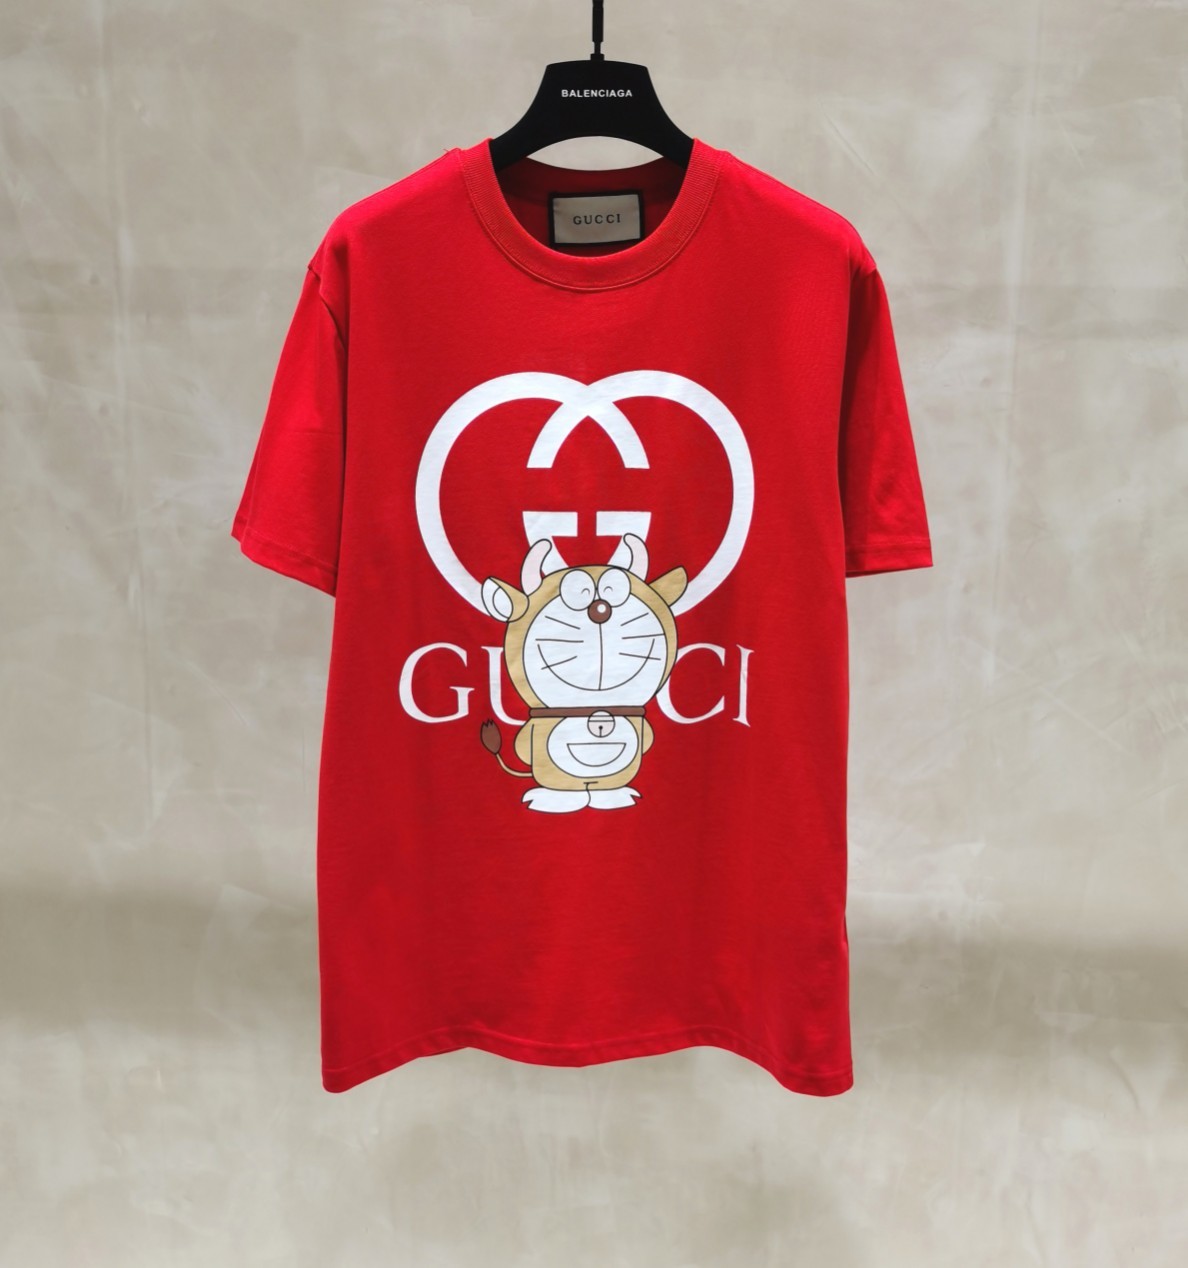 GUCCI men's and women's fashion trend personality round neck cotton printed short-sleeved T-shirt